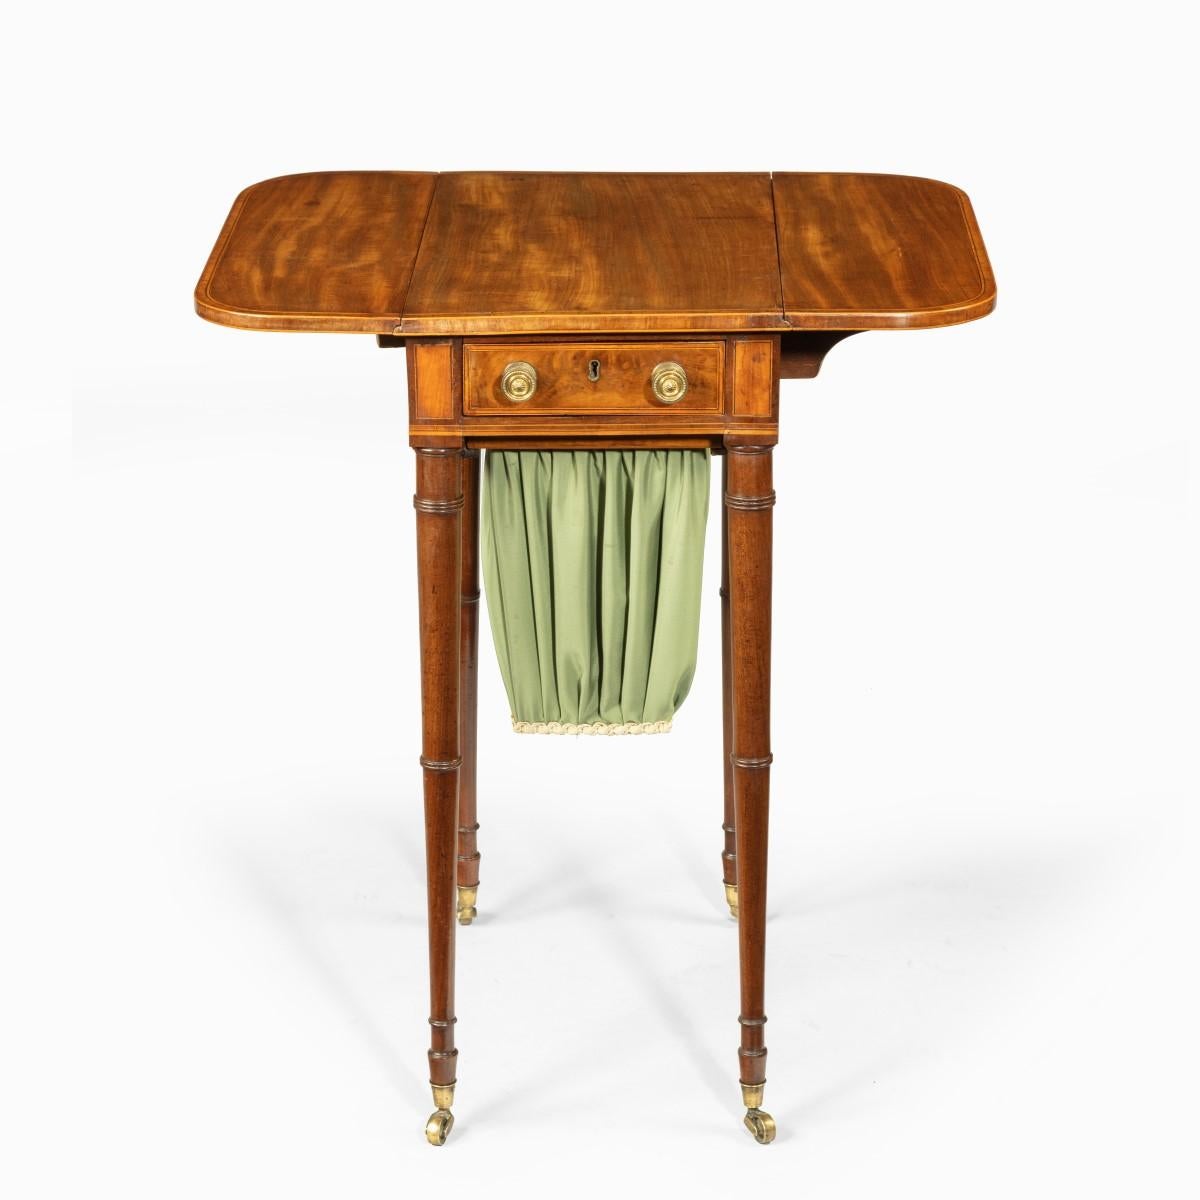 Early 19th Century Elegant George III Mahogany Pembroke Sewing Table For Sale